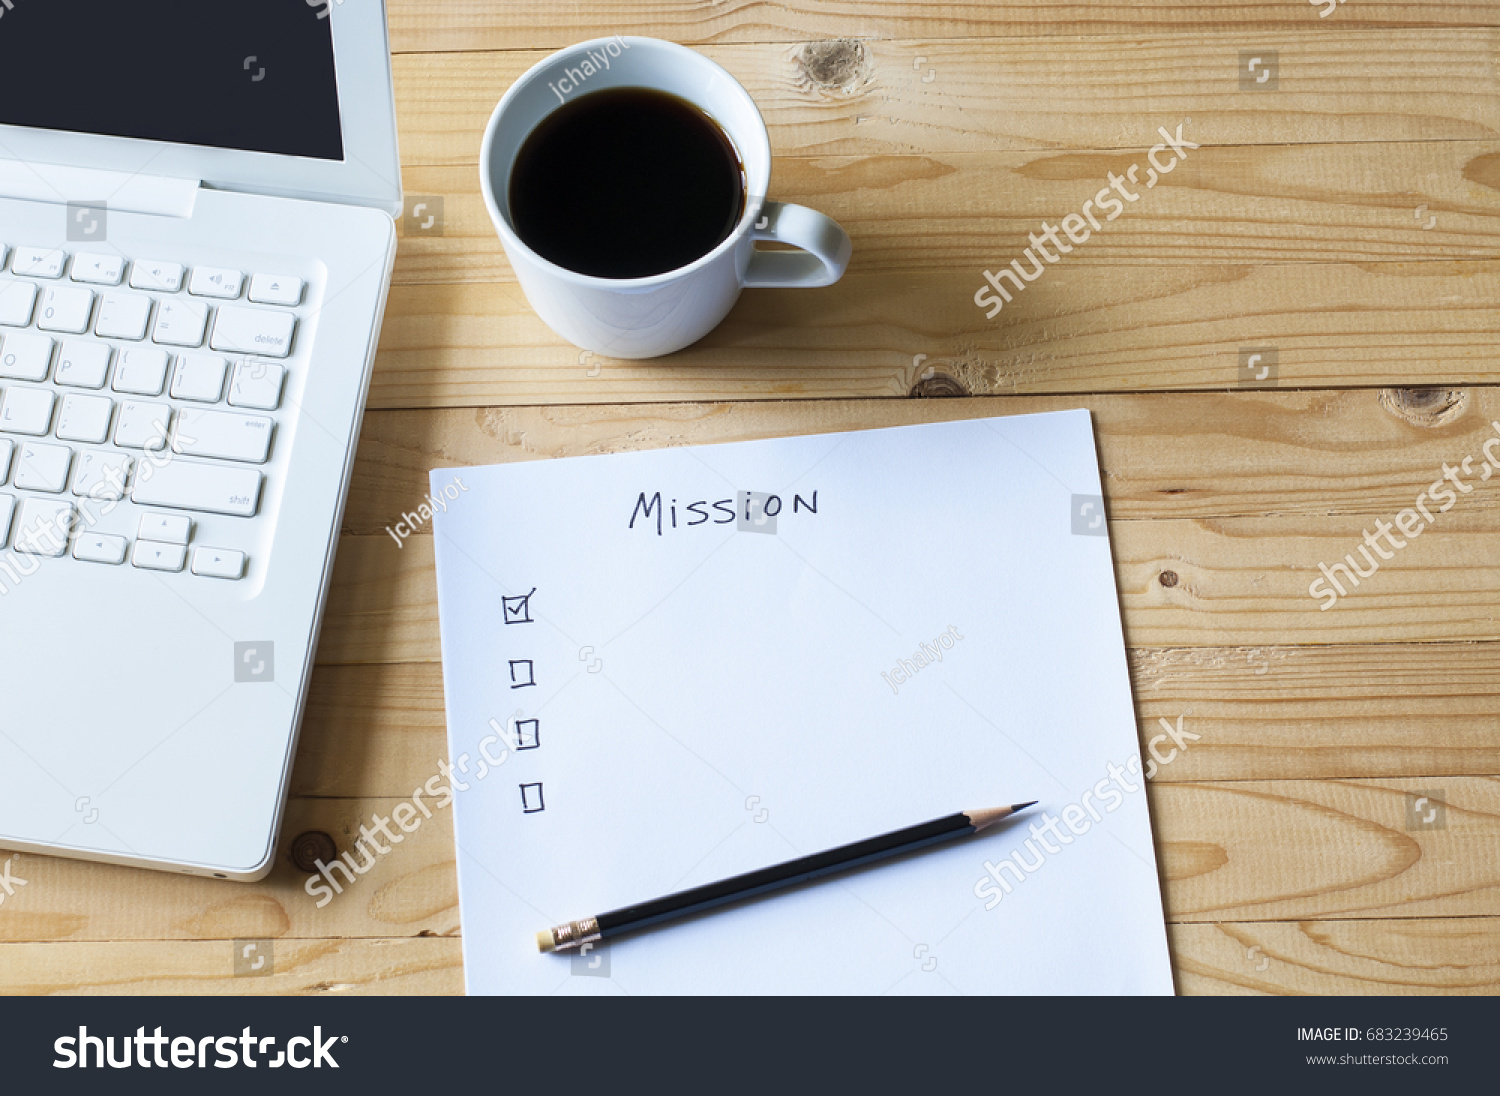 Paper check list for mission laptop and coffee on wood table. #683239465